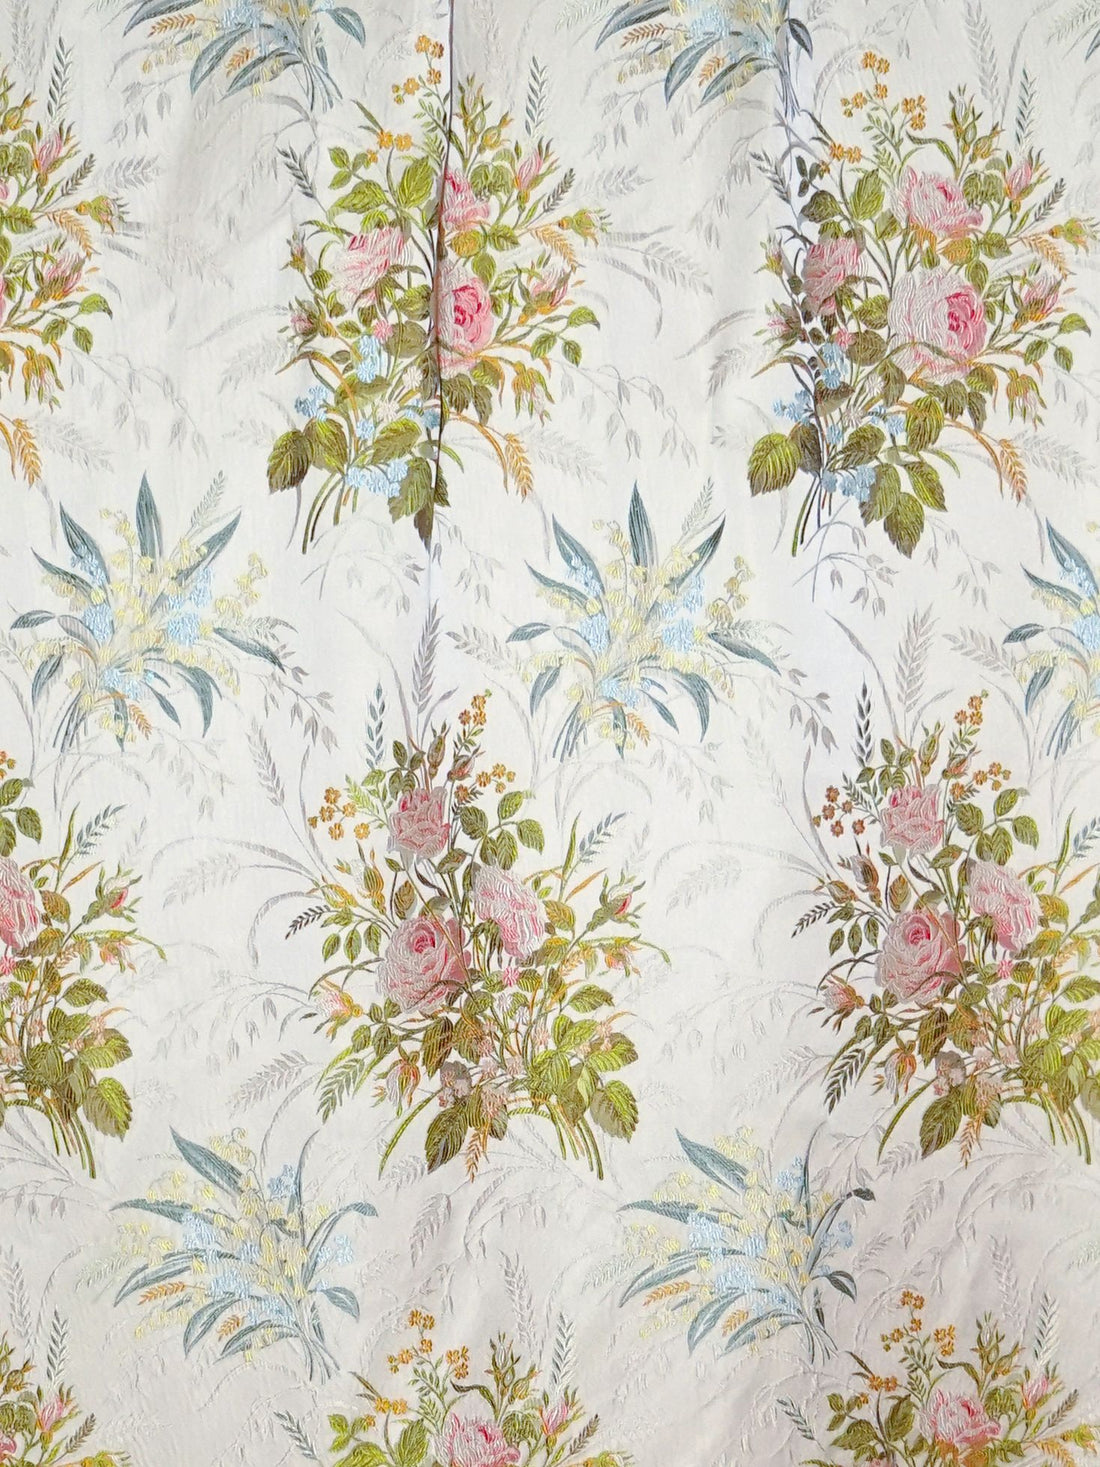 Fiori Rosseta fabric in spring bouquet color - pattern number SB 00012046 - by Scalamandre in the Old World Weavers collection